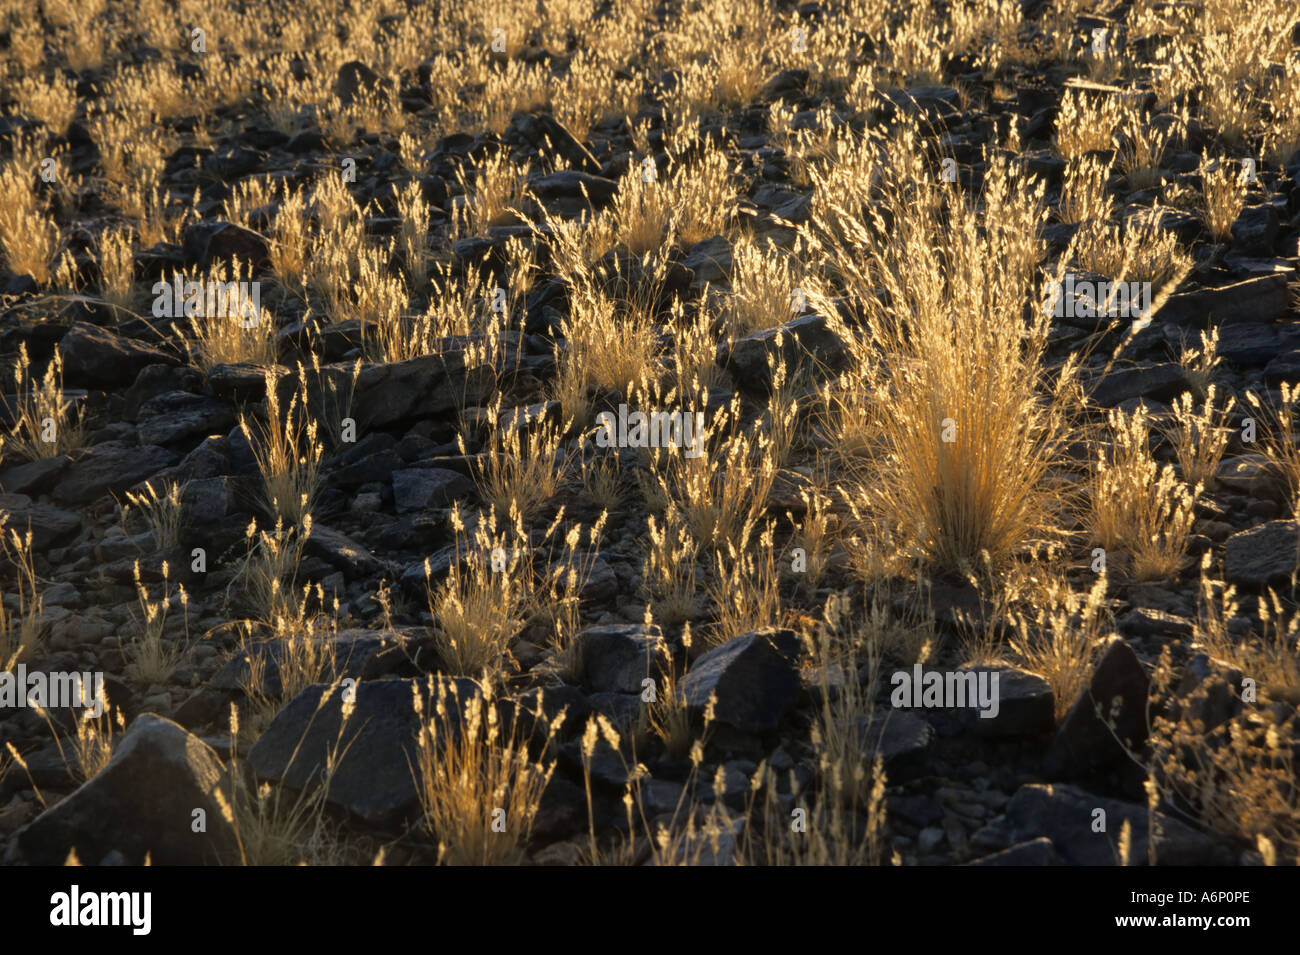 Grass along the Fish River Canyon backlit by sunlight. Fish River Canyon, Ai-Ais/Richtersveld Transfrontier National Park, Namibia, Africa Stock Photo